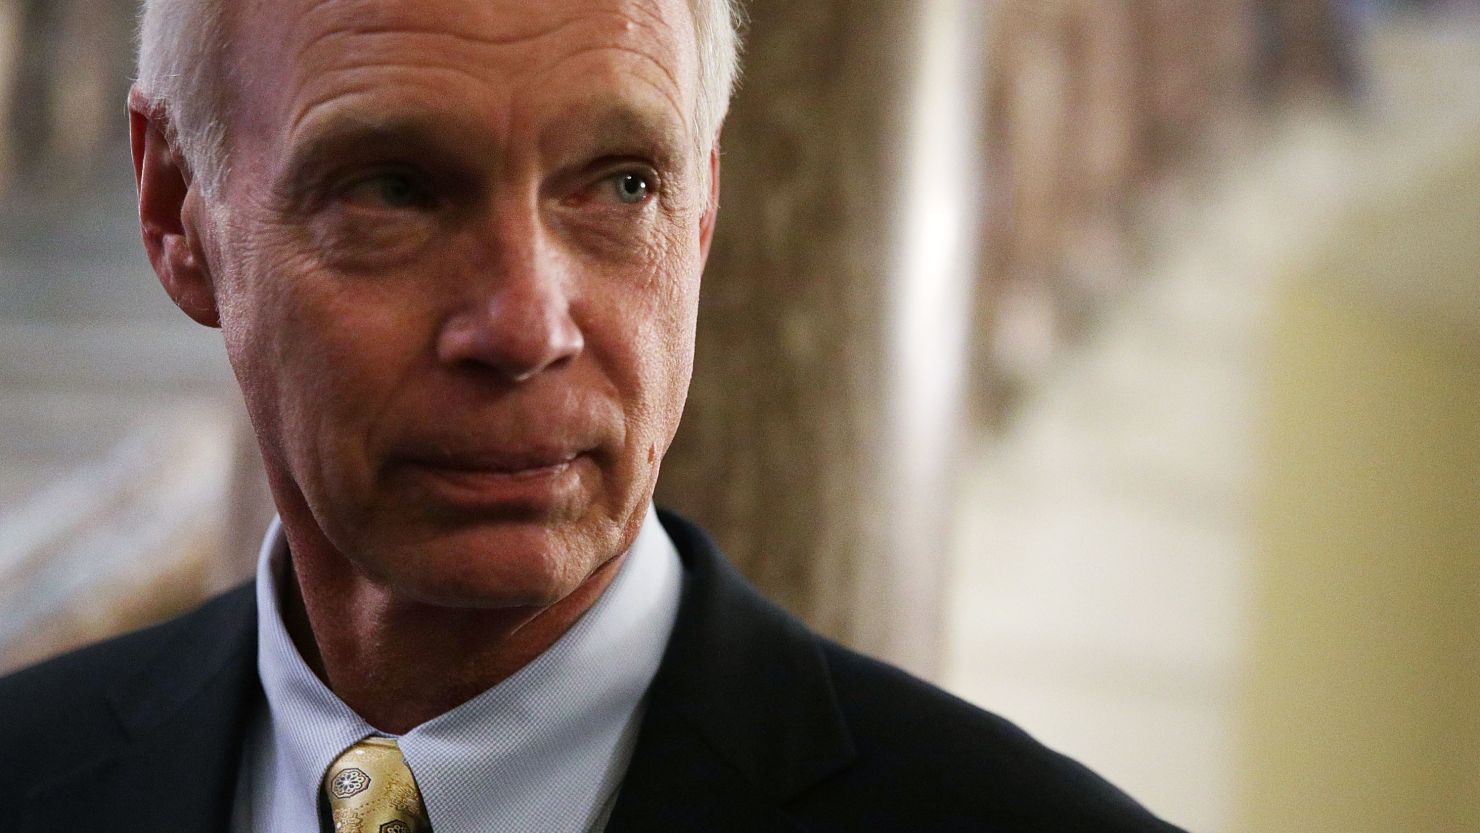 WASHINGTON, DC - DECEMBER 01:  U.S. Sen. Ron Johnson (R-WI) listens to a question from a member of the press at the Capitol December 1, 2017 in Washington, DC. Senate GOPs indicate that they have enough votes to pass the tax reform bill.  (Alex Wong/Getty Images)